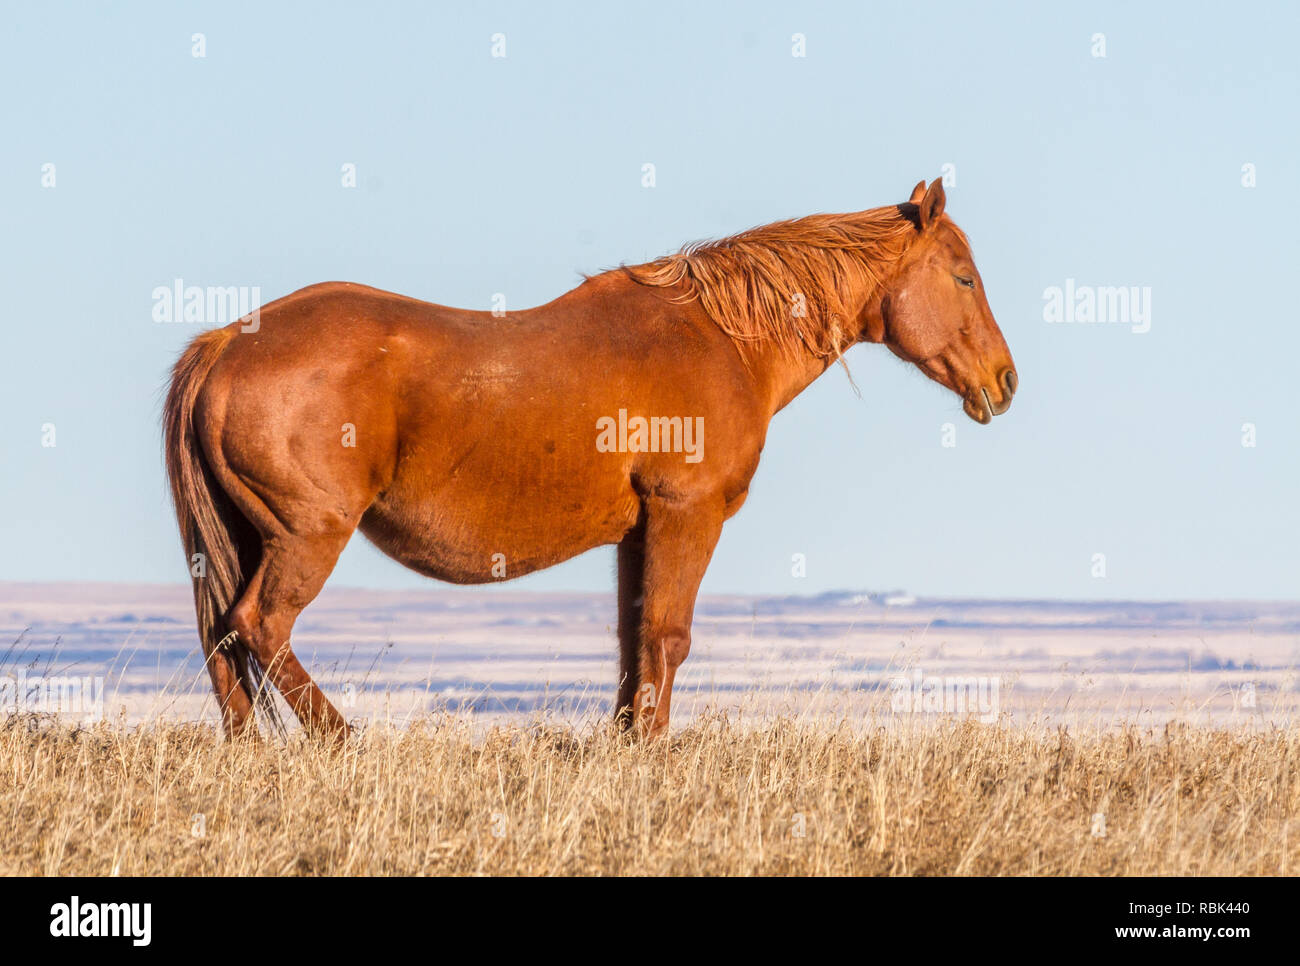 Side view of brown horse standing, with yellow grass and blue sky, and no snow during winter in rural Alberta, Canada. Some room for text. Stock Photo